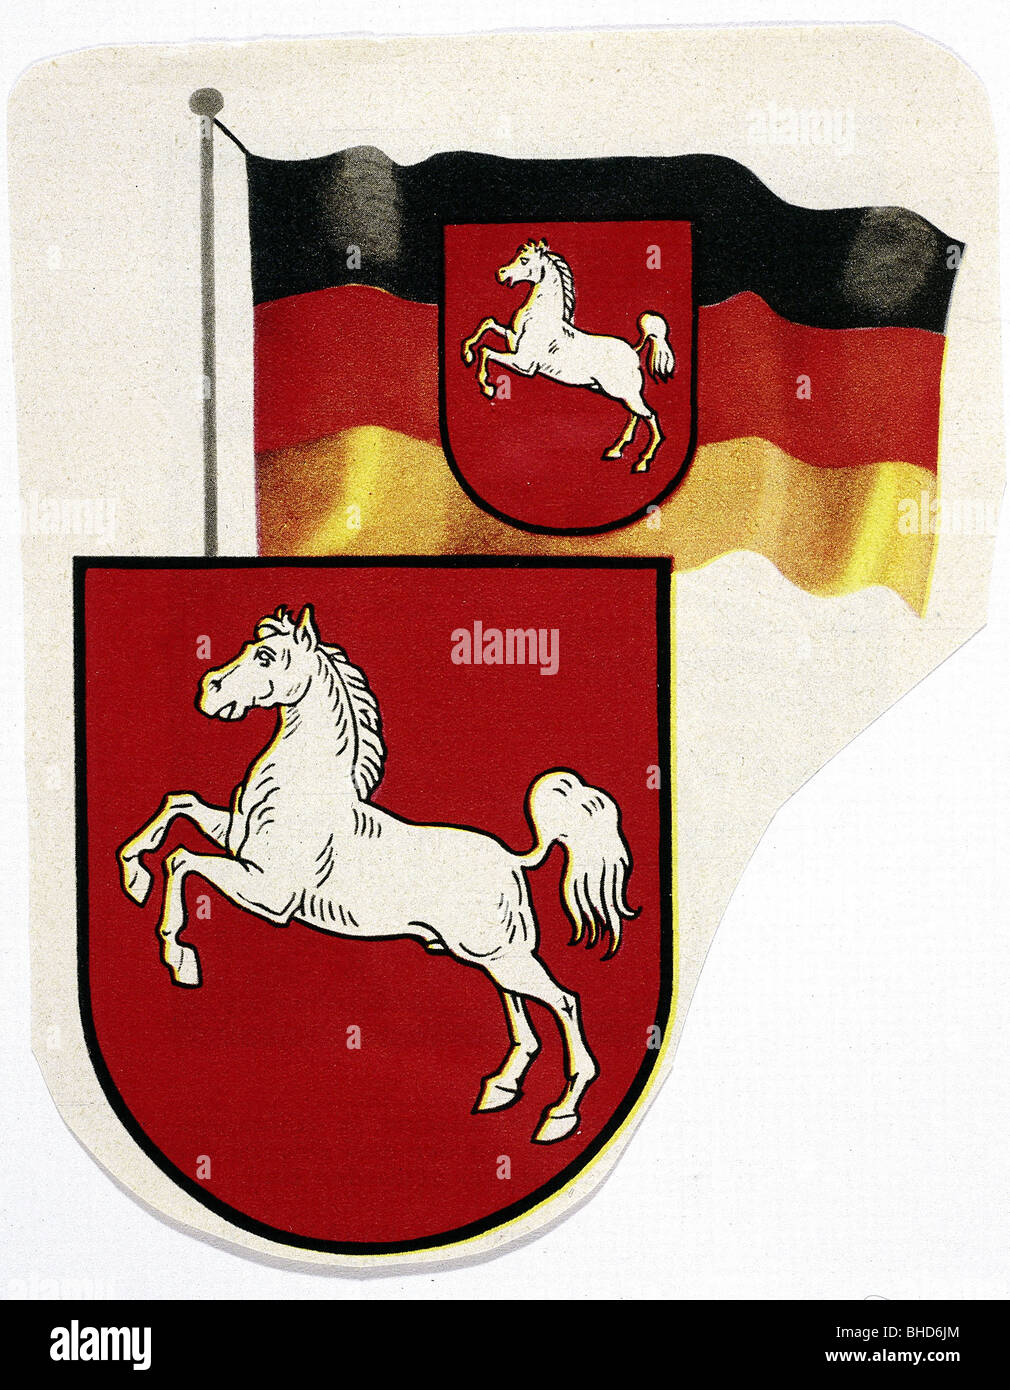 coat of arms, flag and coat of arms of Lower Saxony, Federal Republic of Germany, heraldry, white horse, steed, Dukes of Brunswi Stock Photo